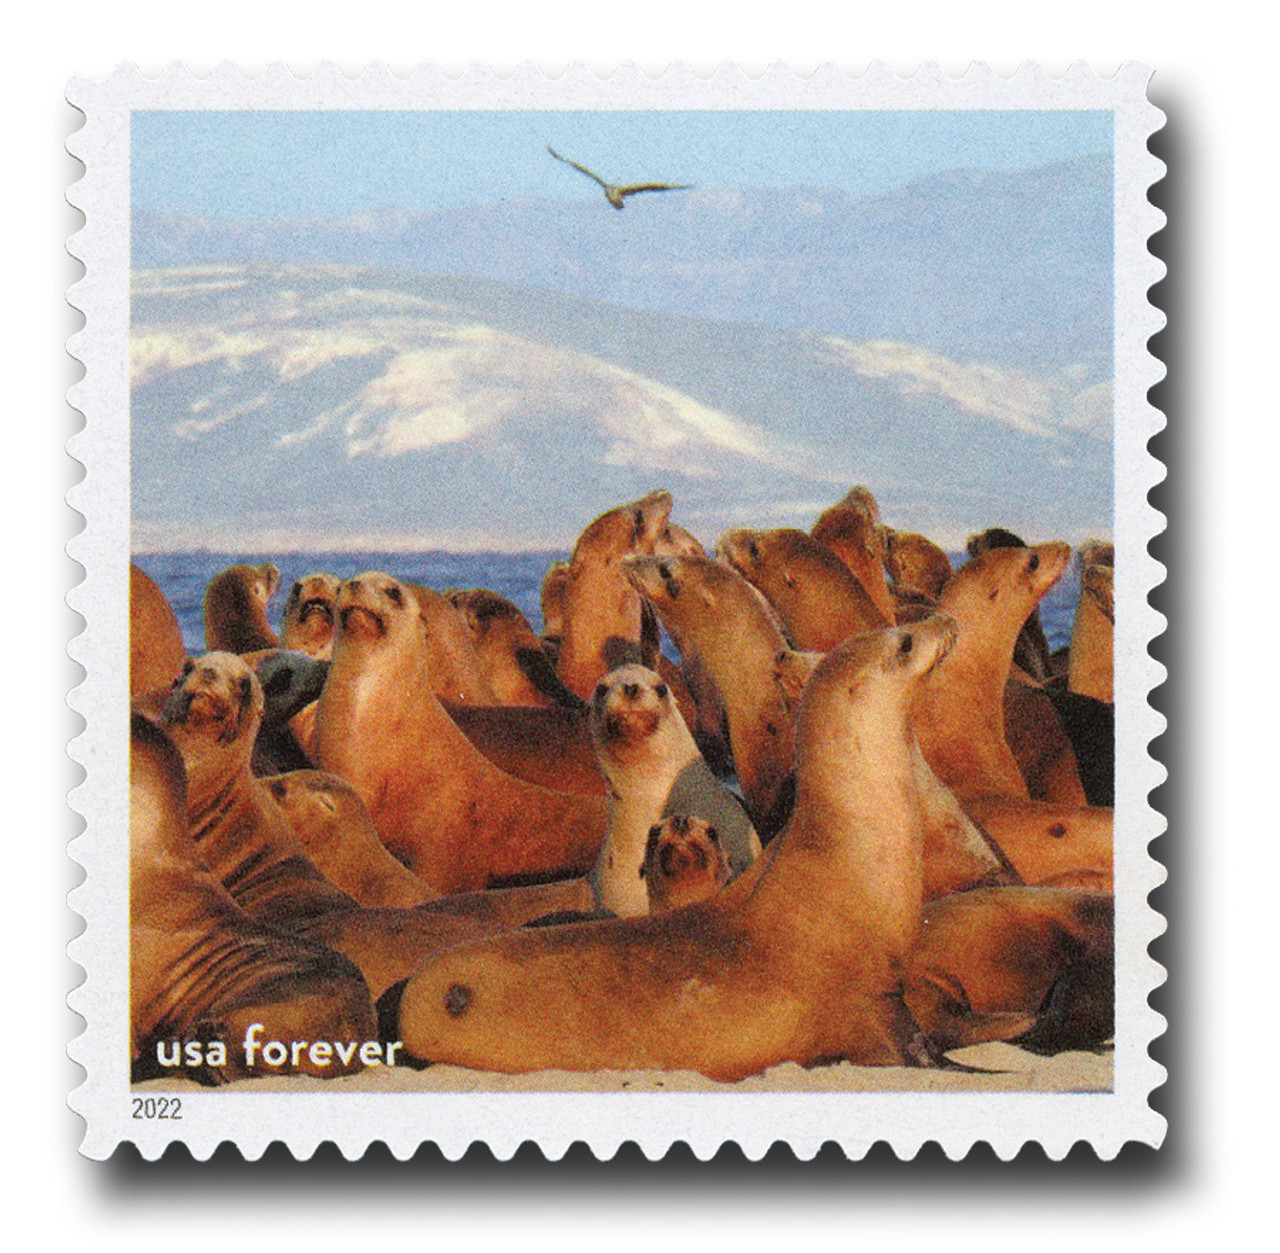 Book of U.S. Postal Forever Stamps – Hail the Snail Mail